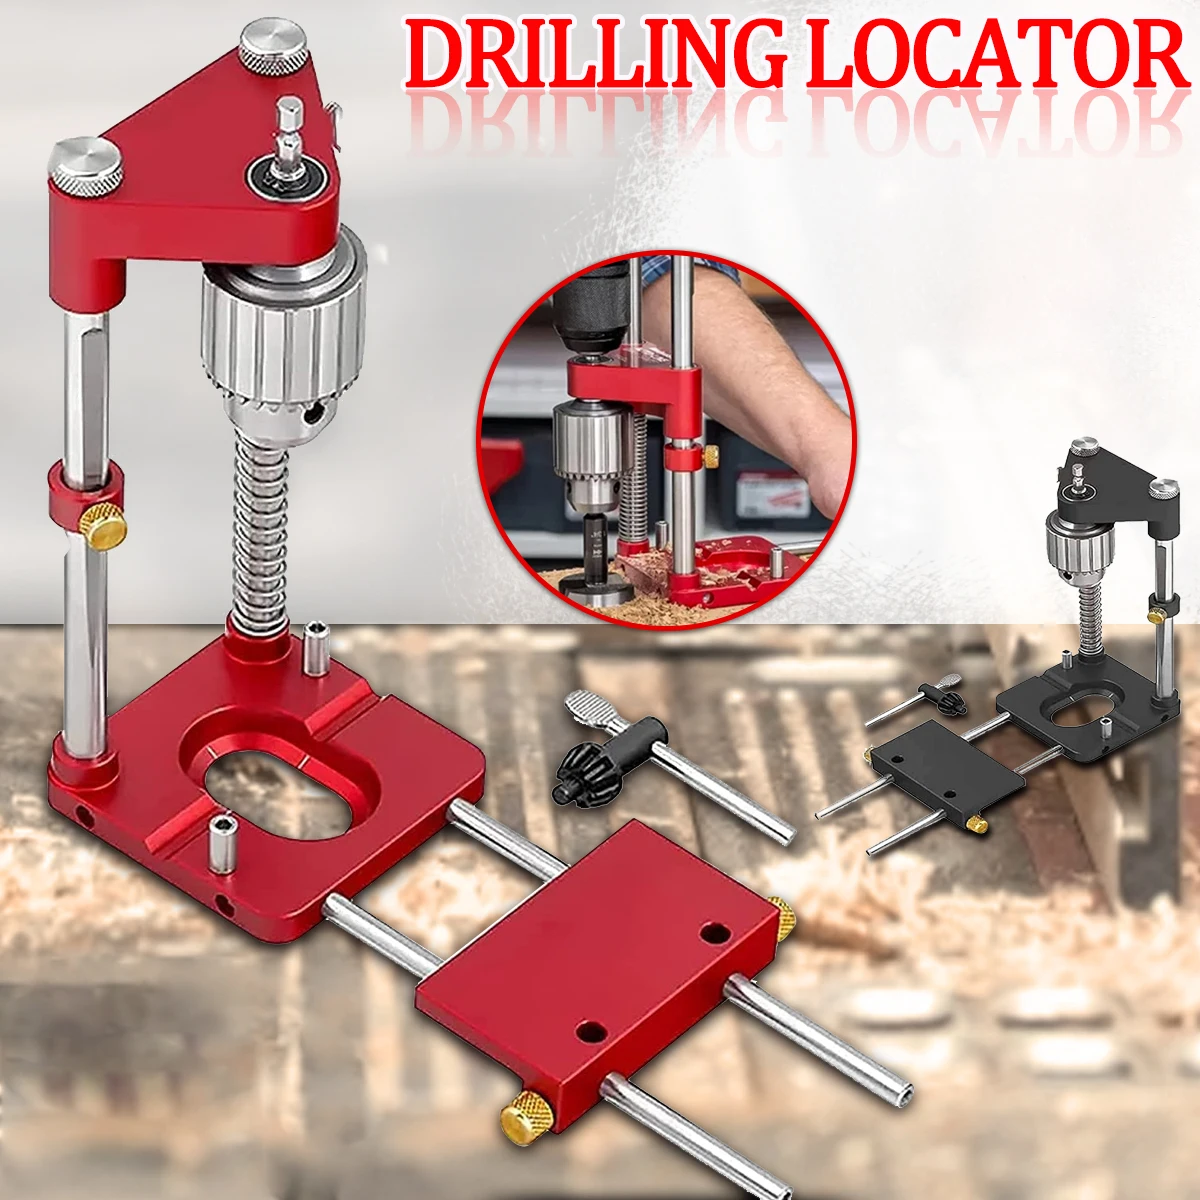 Drill Locator Hole Drill Guide Dowel Jig Convenient Labor Saving Plastic Steel Woodworking Drilling Template Guide Tool for Home